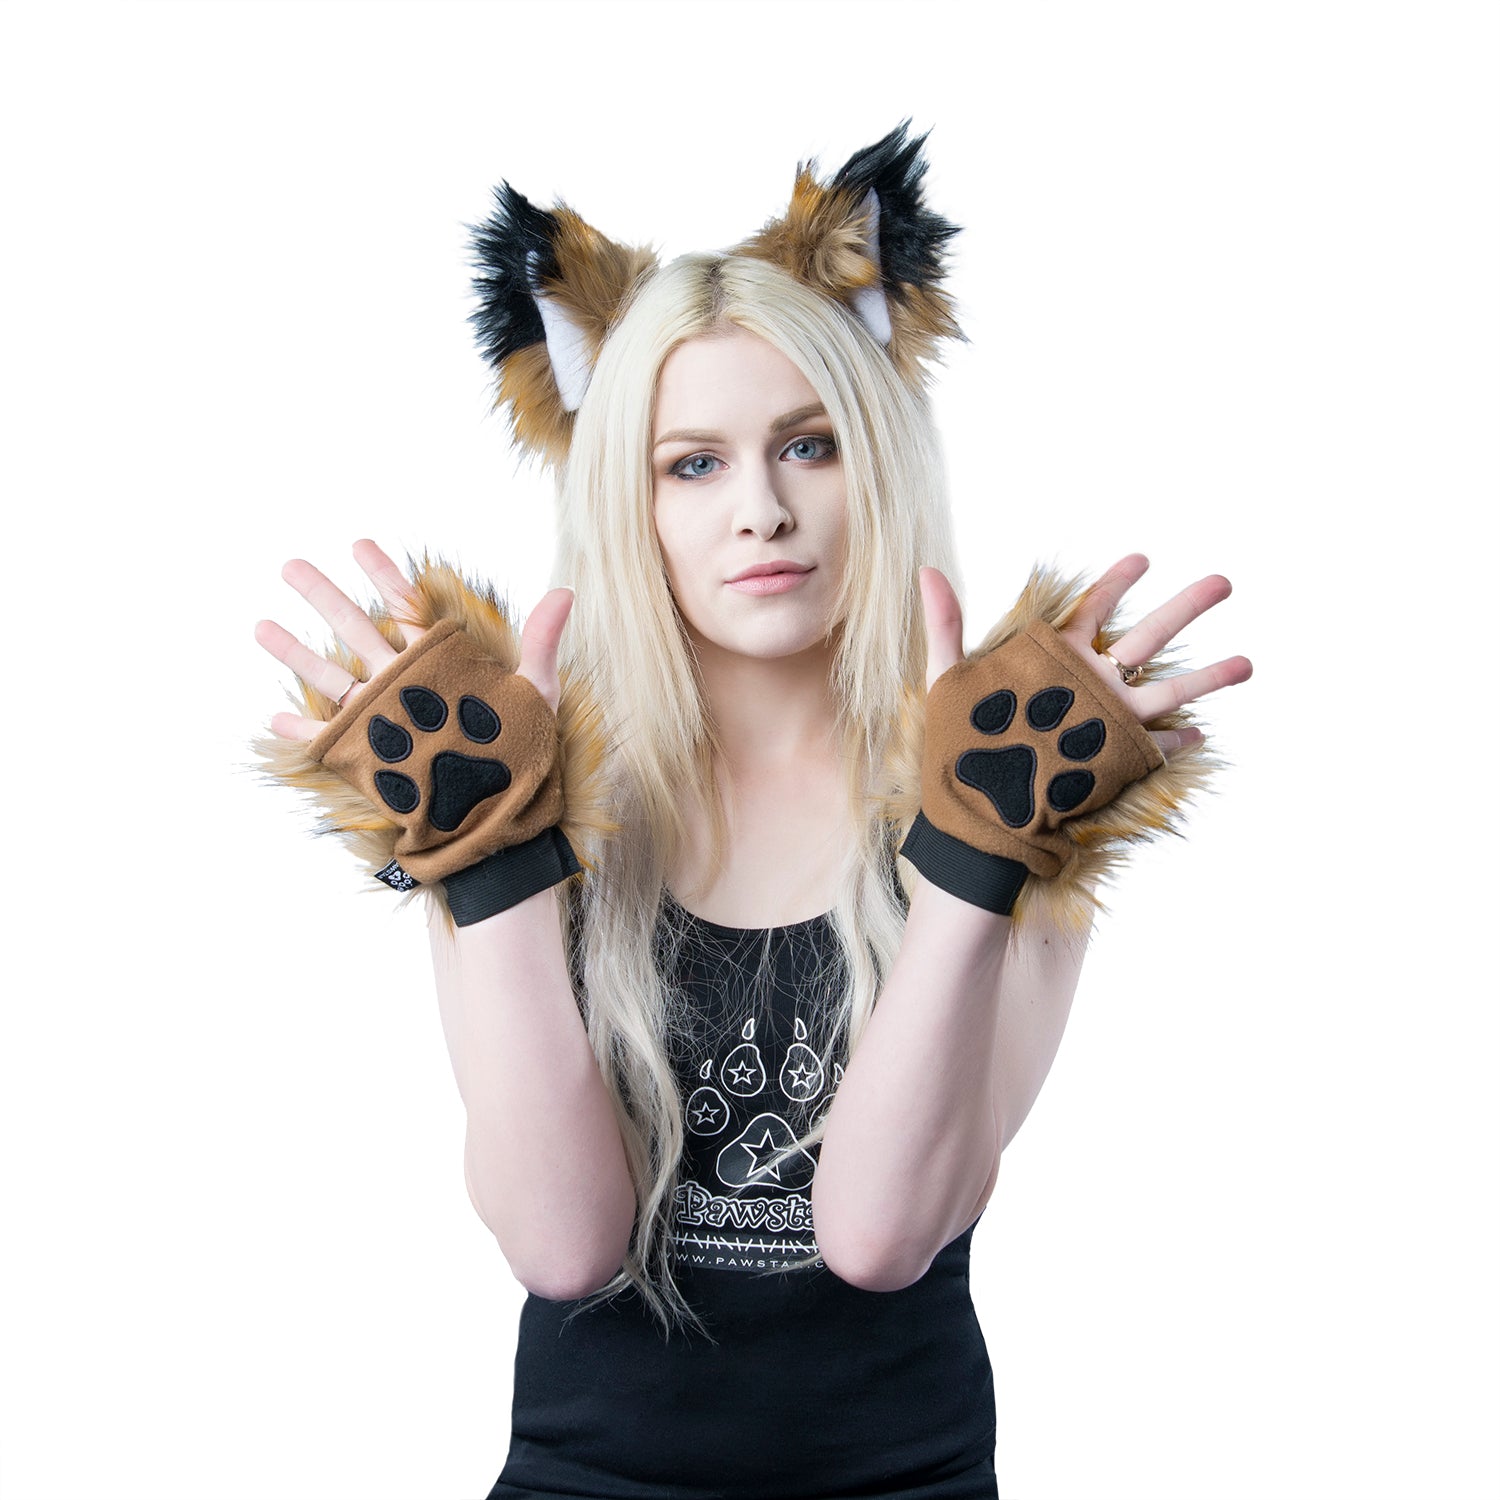 Pepper Fox Fur Pawlets - Pawstar Pawstar Pawlets cosplay, costume, furry, hand paws, paw, ship-15, ship-30day